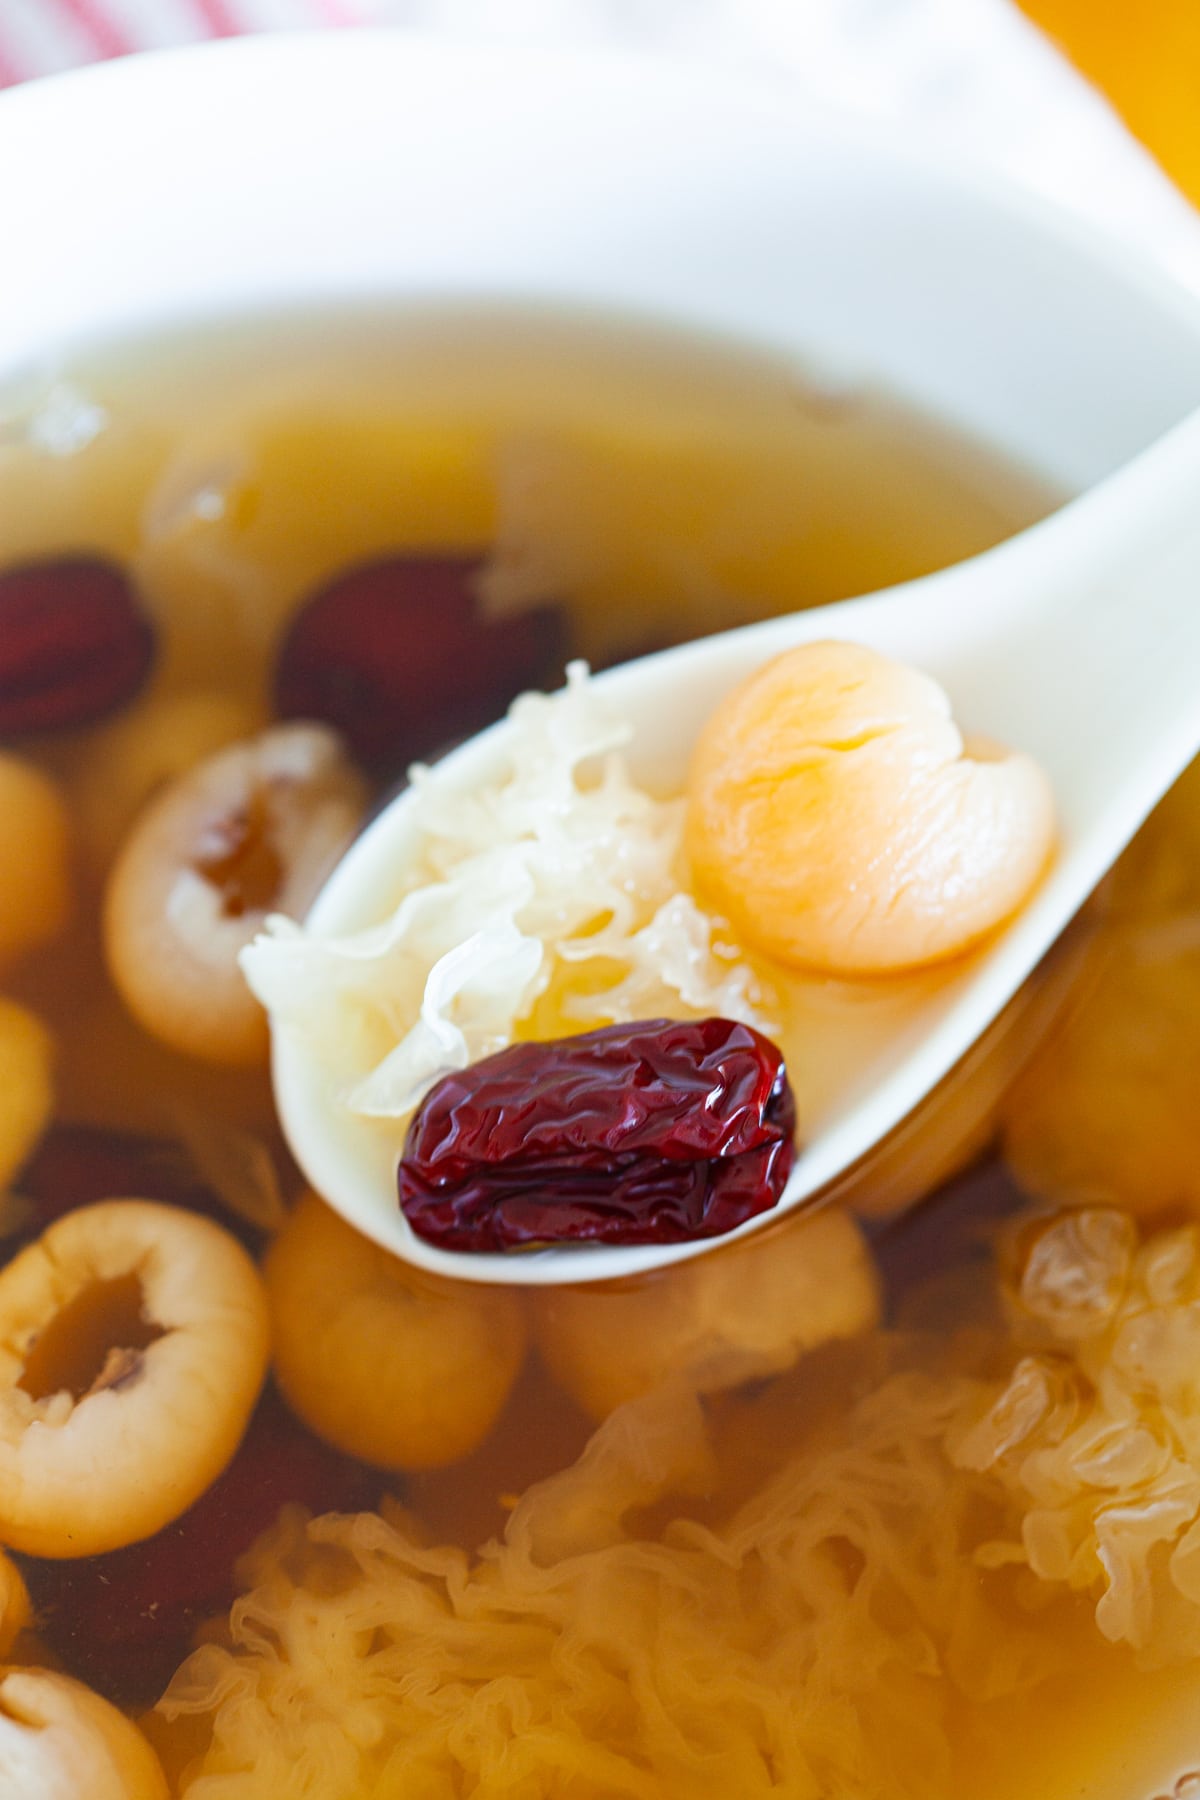 Snow Fungus Dessert Soup with longan, ready to serve.